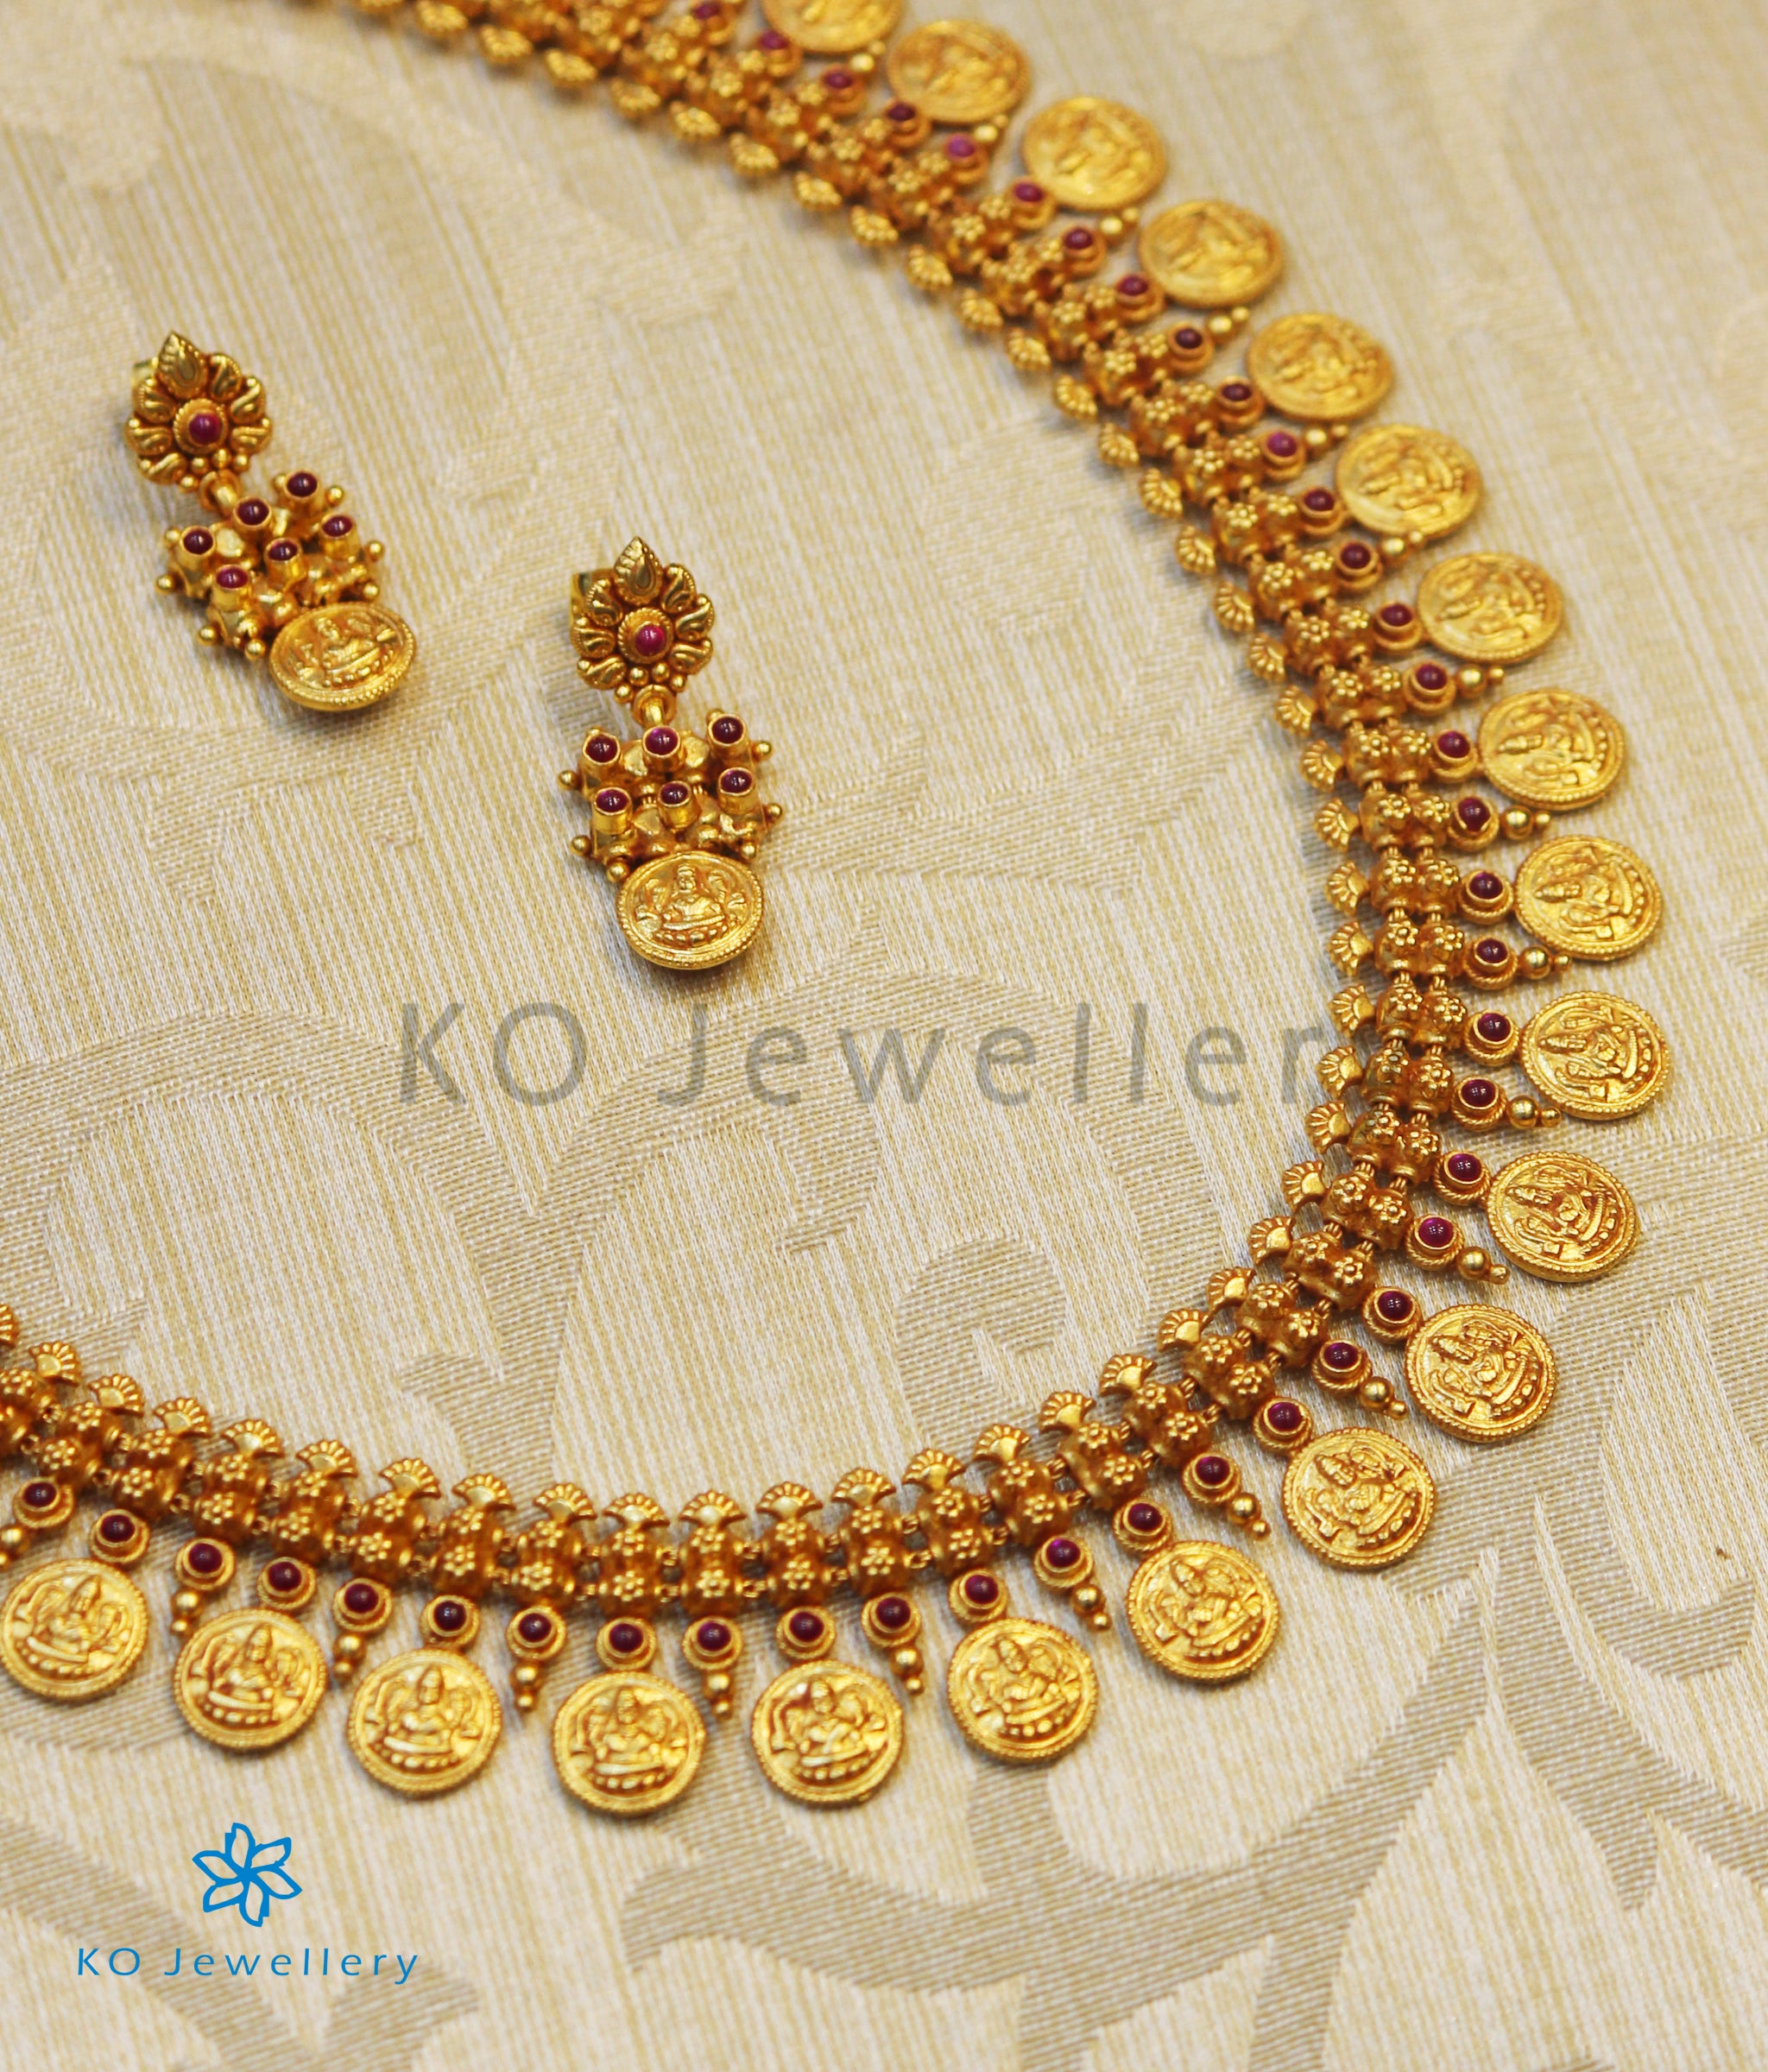 Lakshmi Devi Gold Haram Designs With Price And Weight